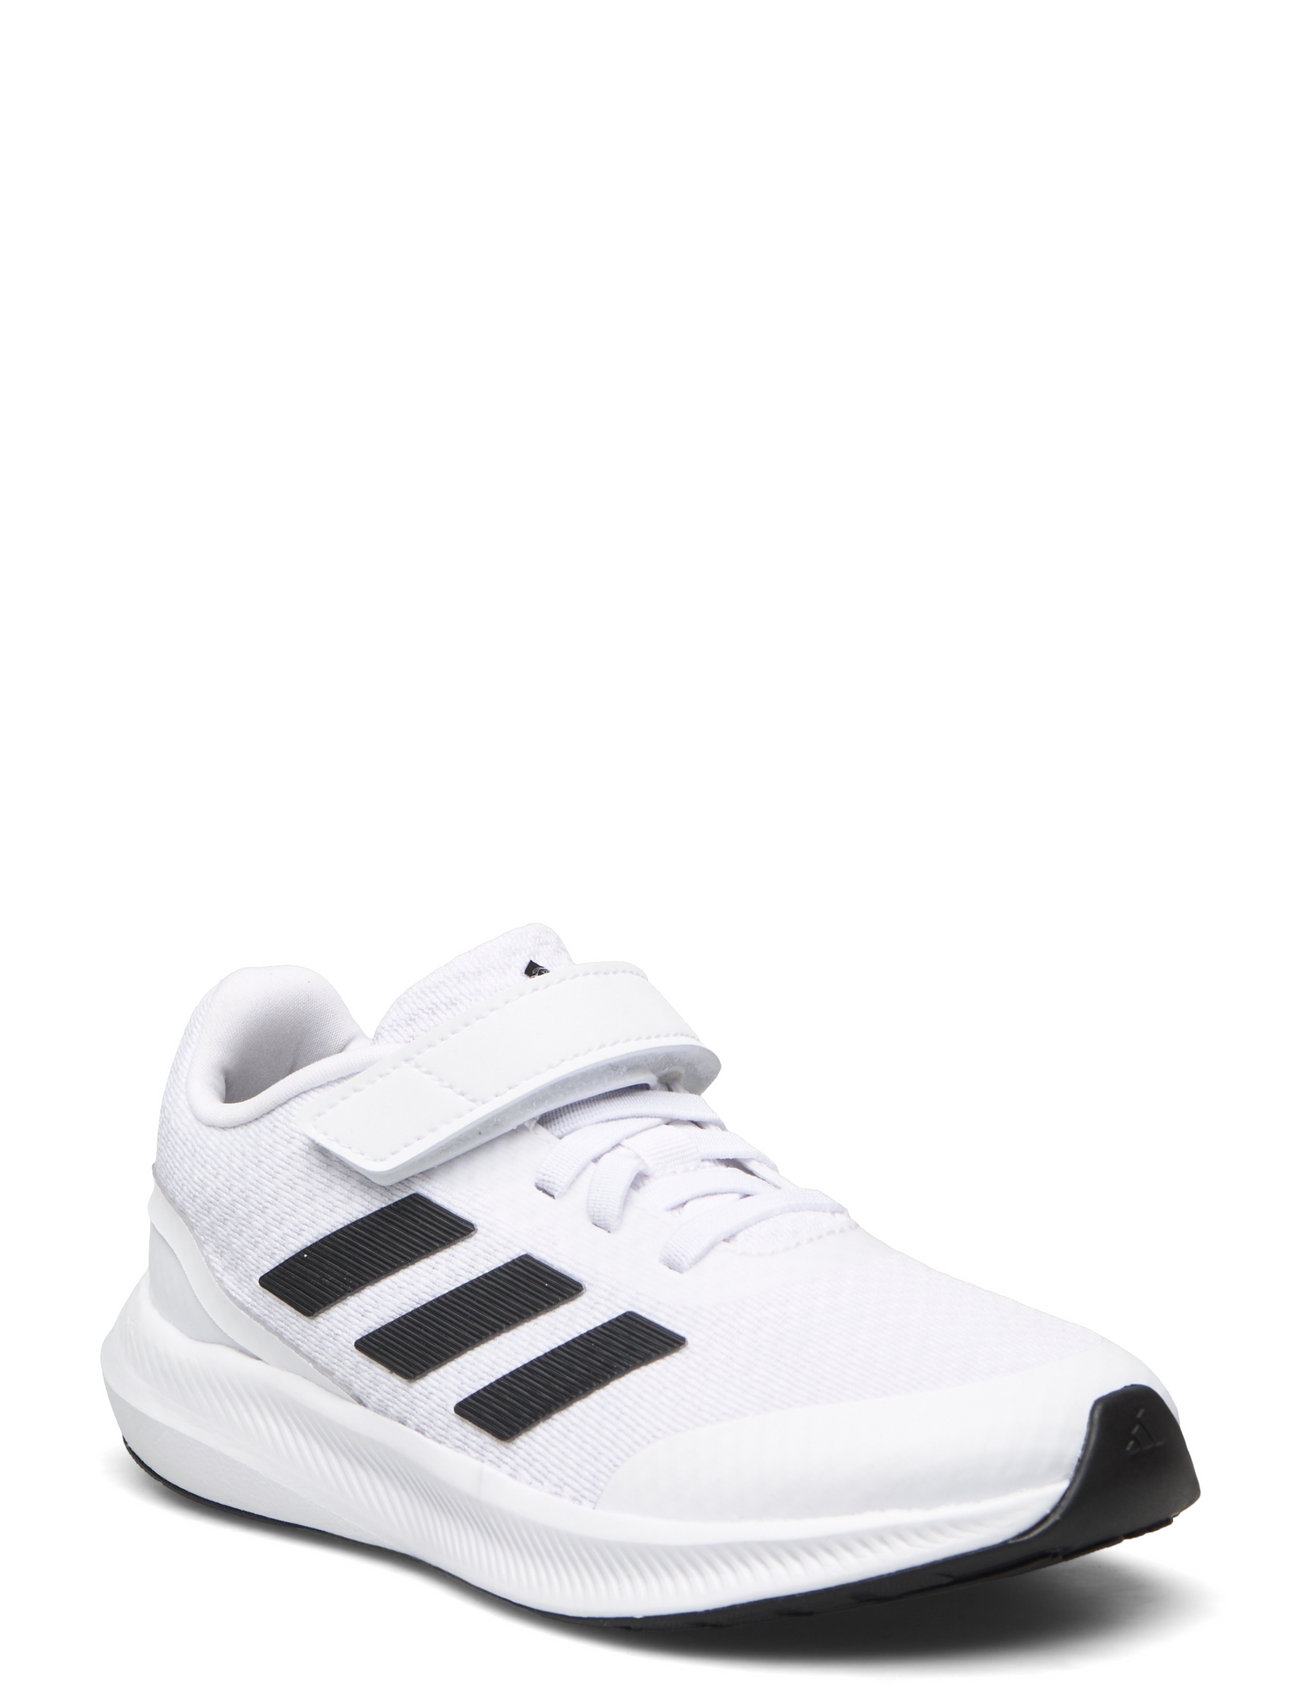 adidas Performance Runfalcon 3.0 Elastic Lace Top Strap Shoes - Sneakers